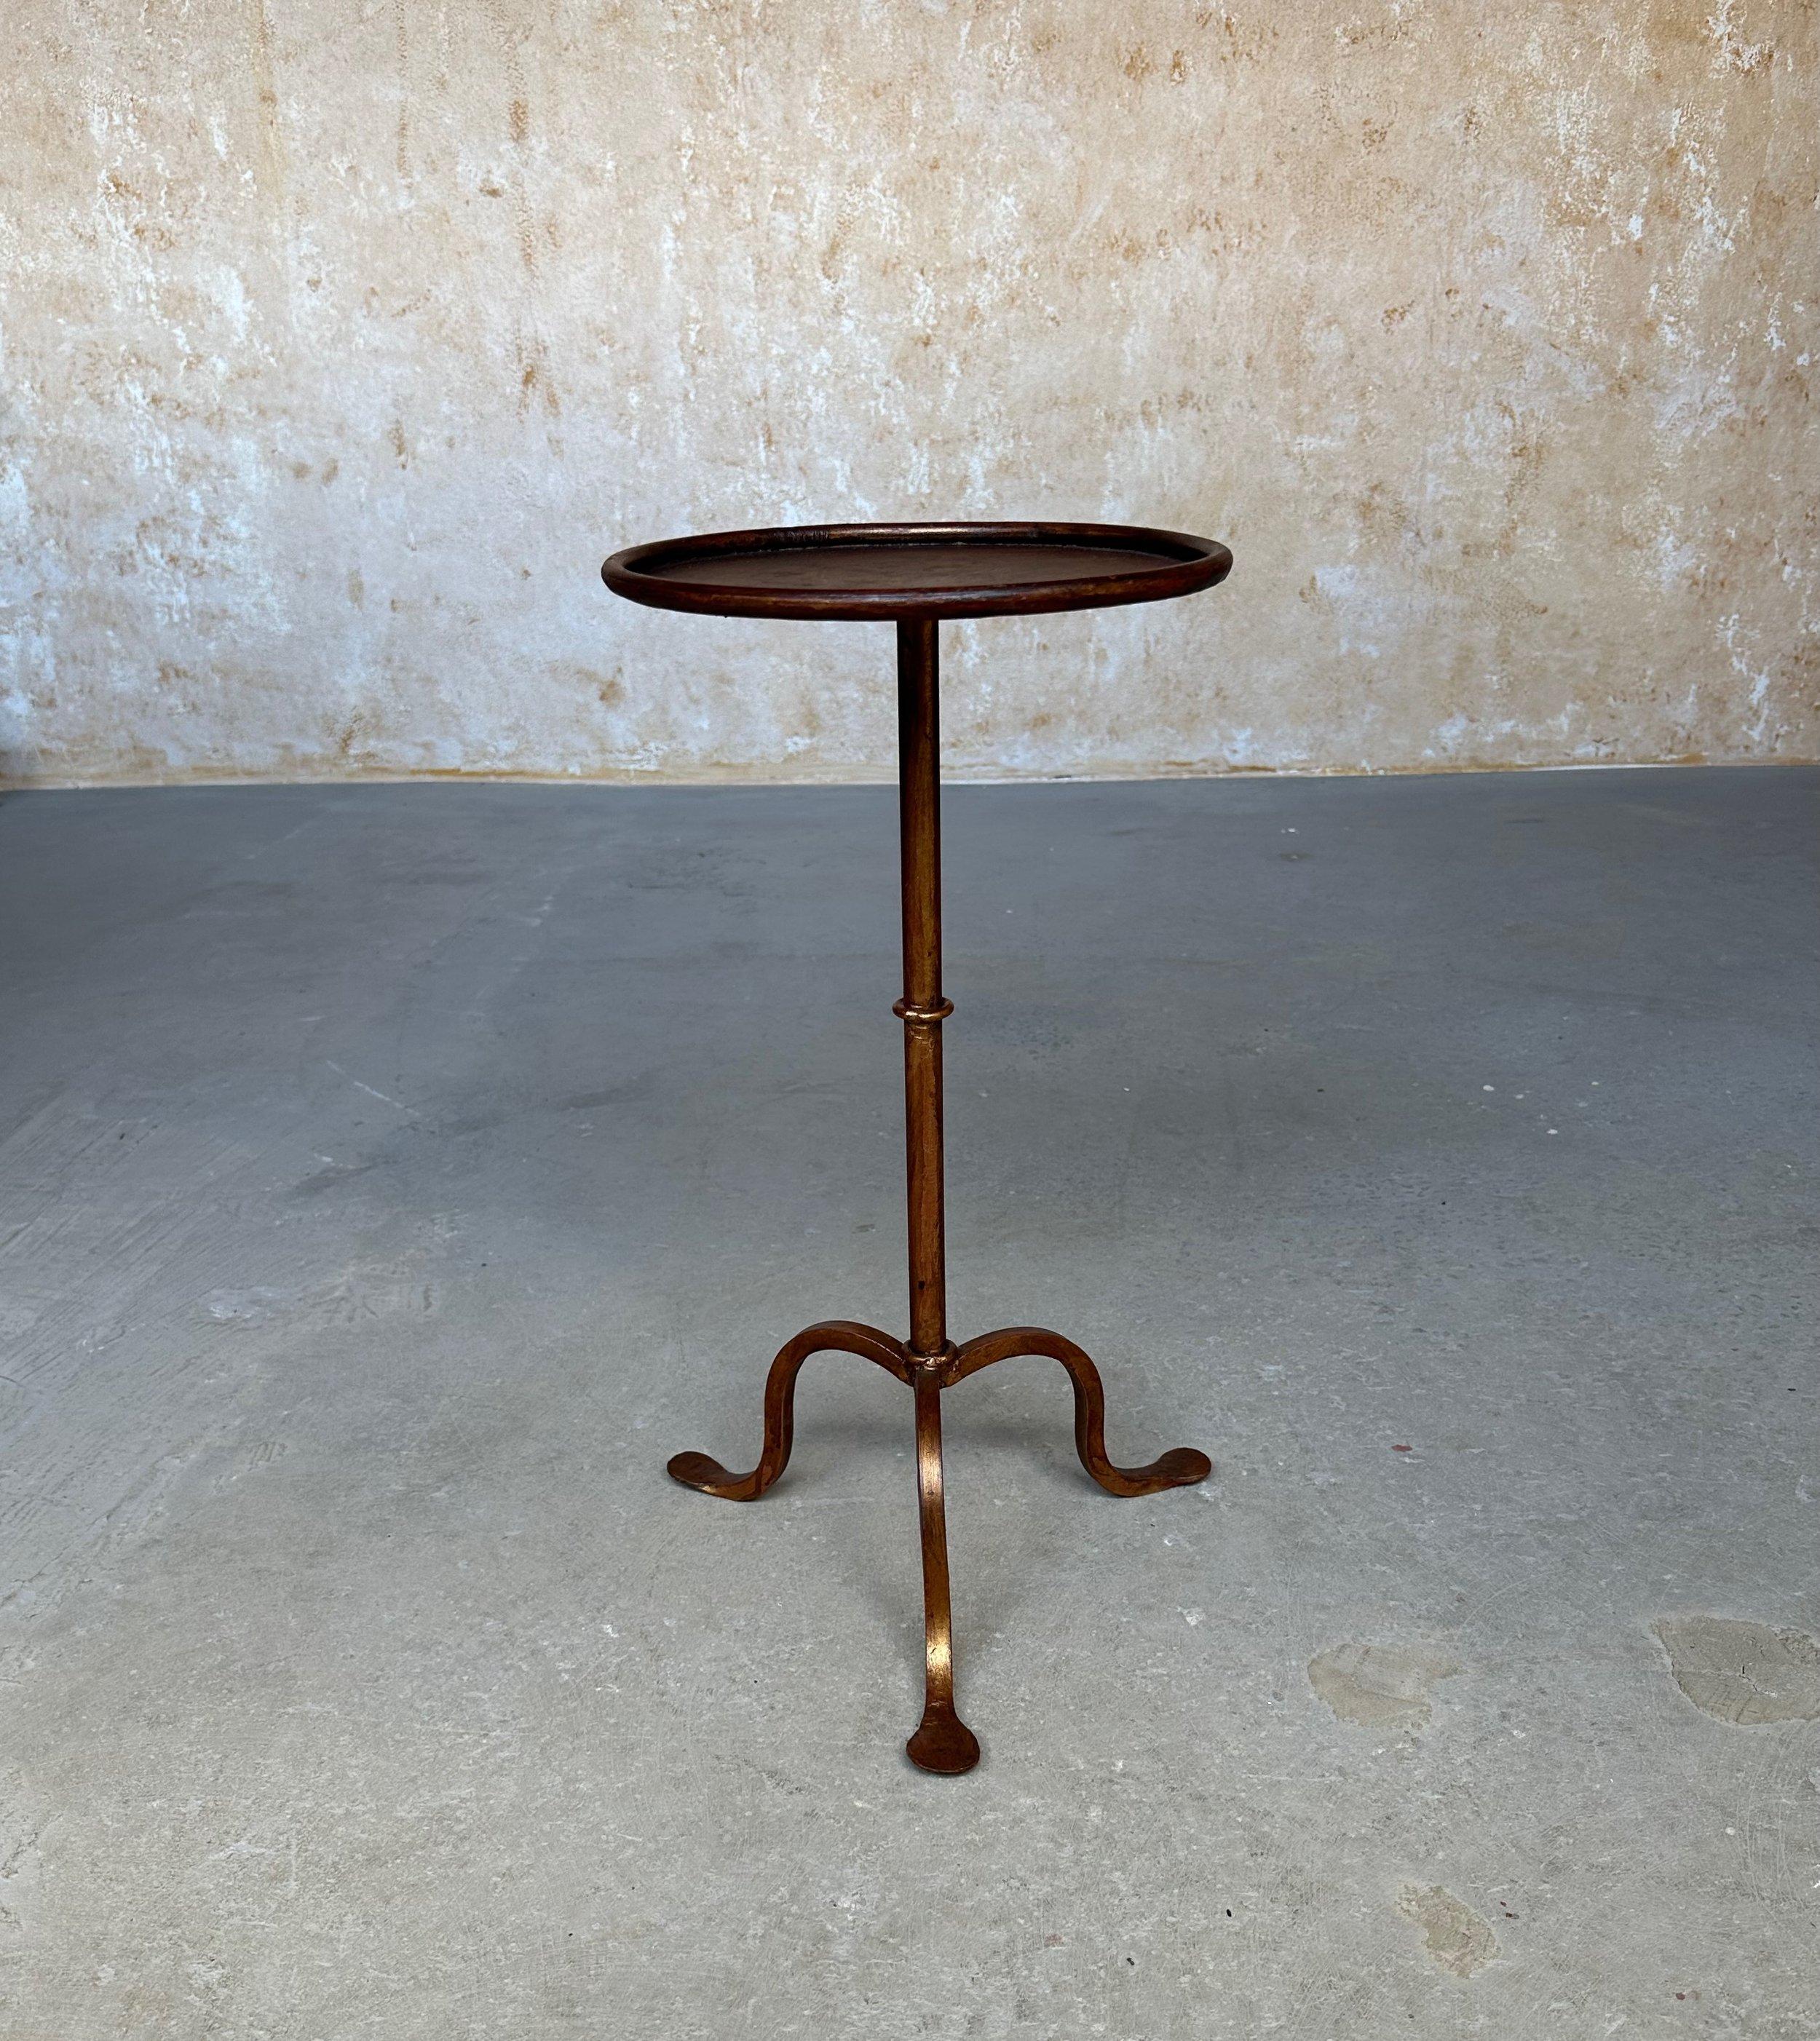 This recently crafted small Spanish gilt iron martini table is not only elegant but functional. Based on a vintage 1950s design, it was recently created by accomplished artisans using traditional iron-working methods with an emphasis on superior